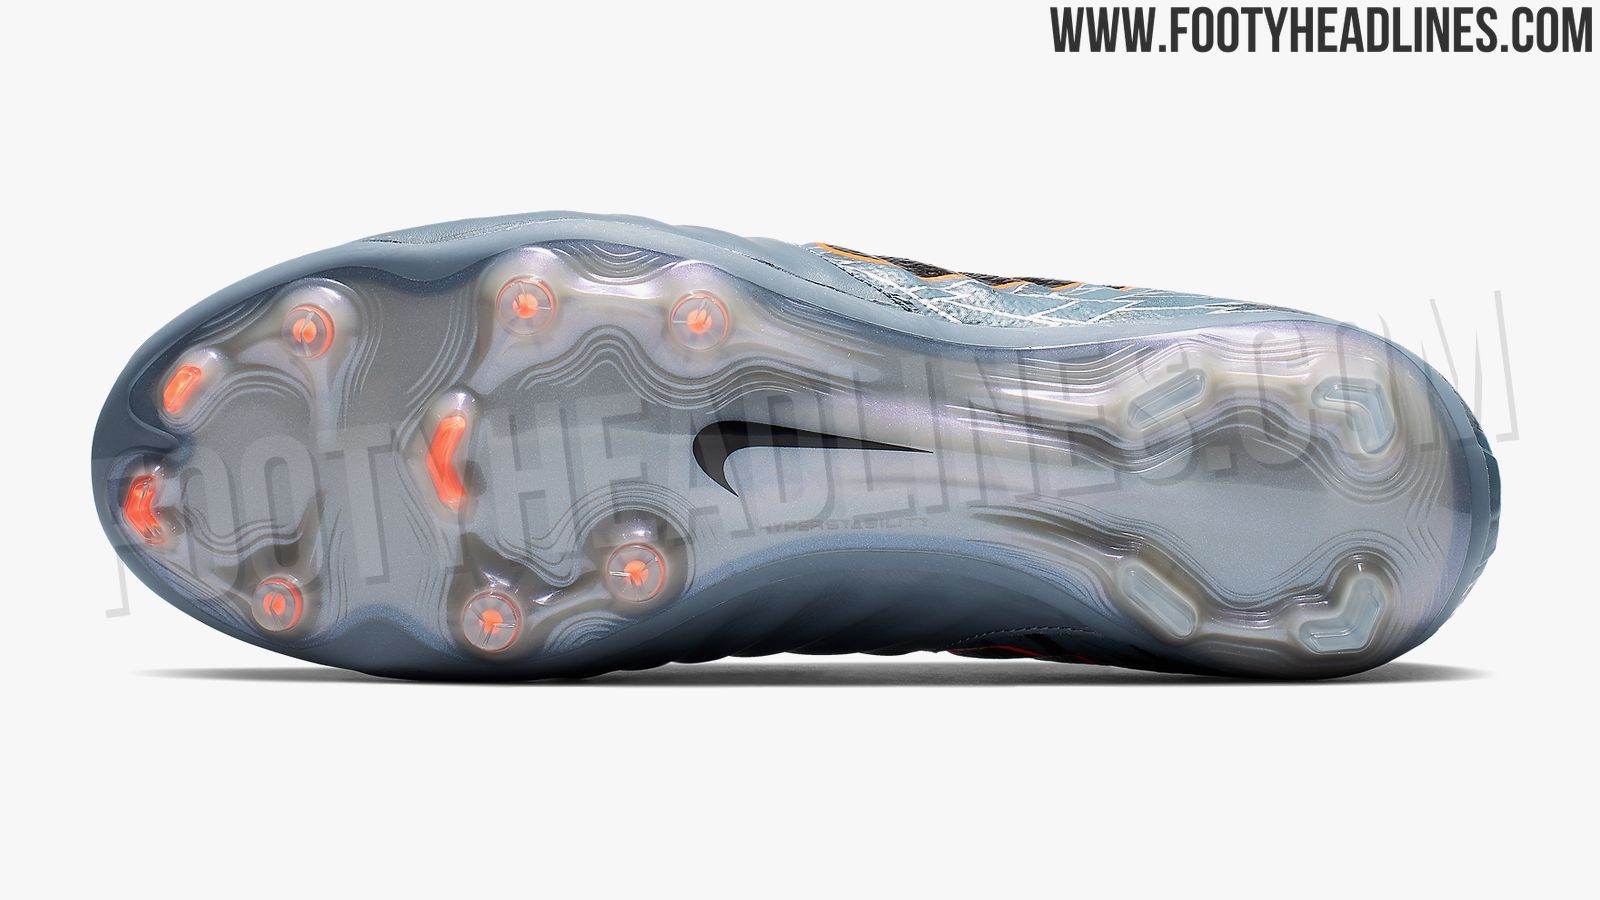 Nike Tiempo Legend VII 'Victory Pack' 2019 Boots Leaked - Footy Headlines